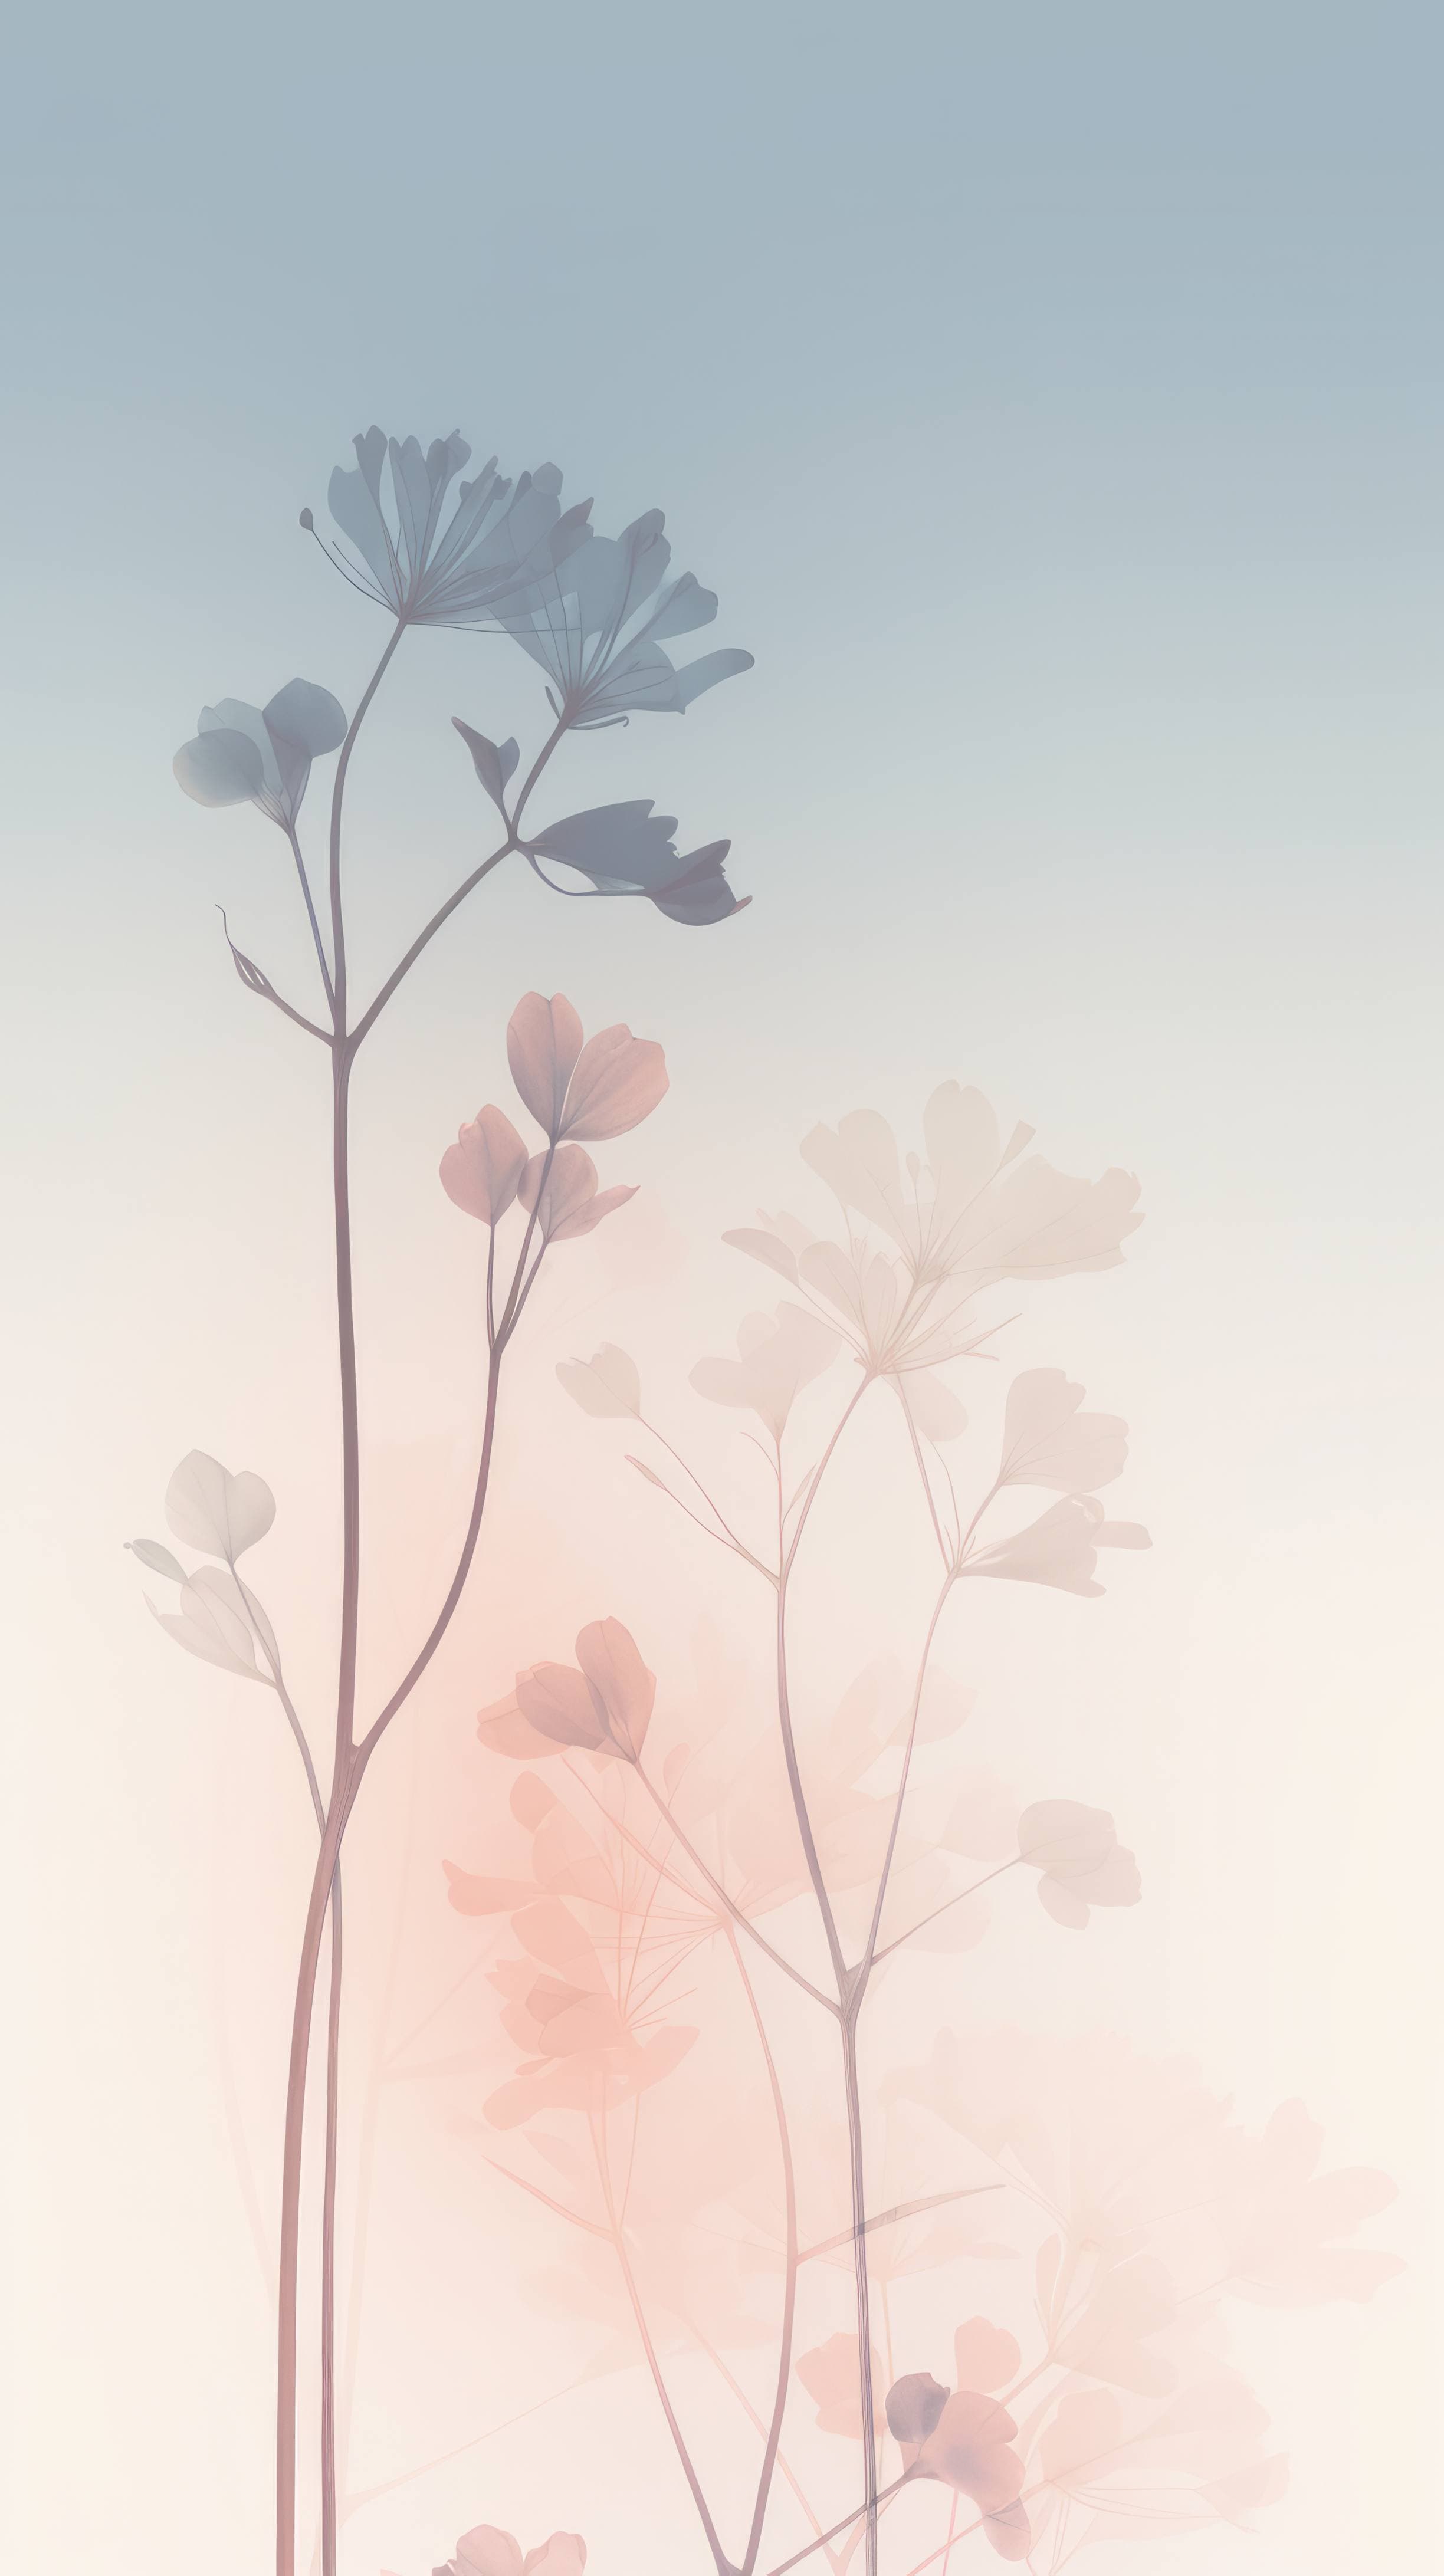 A minimalist wallpaper of dreamy flowers, featuring a single stem with delicate petals in soft hues of pink and blue